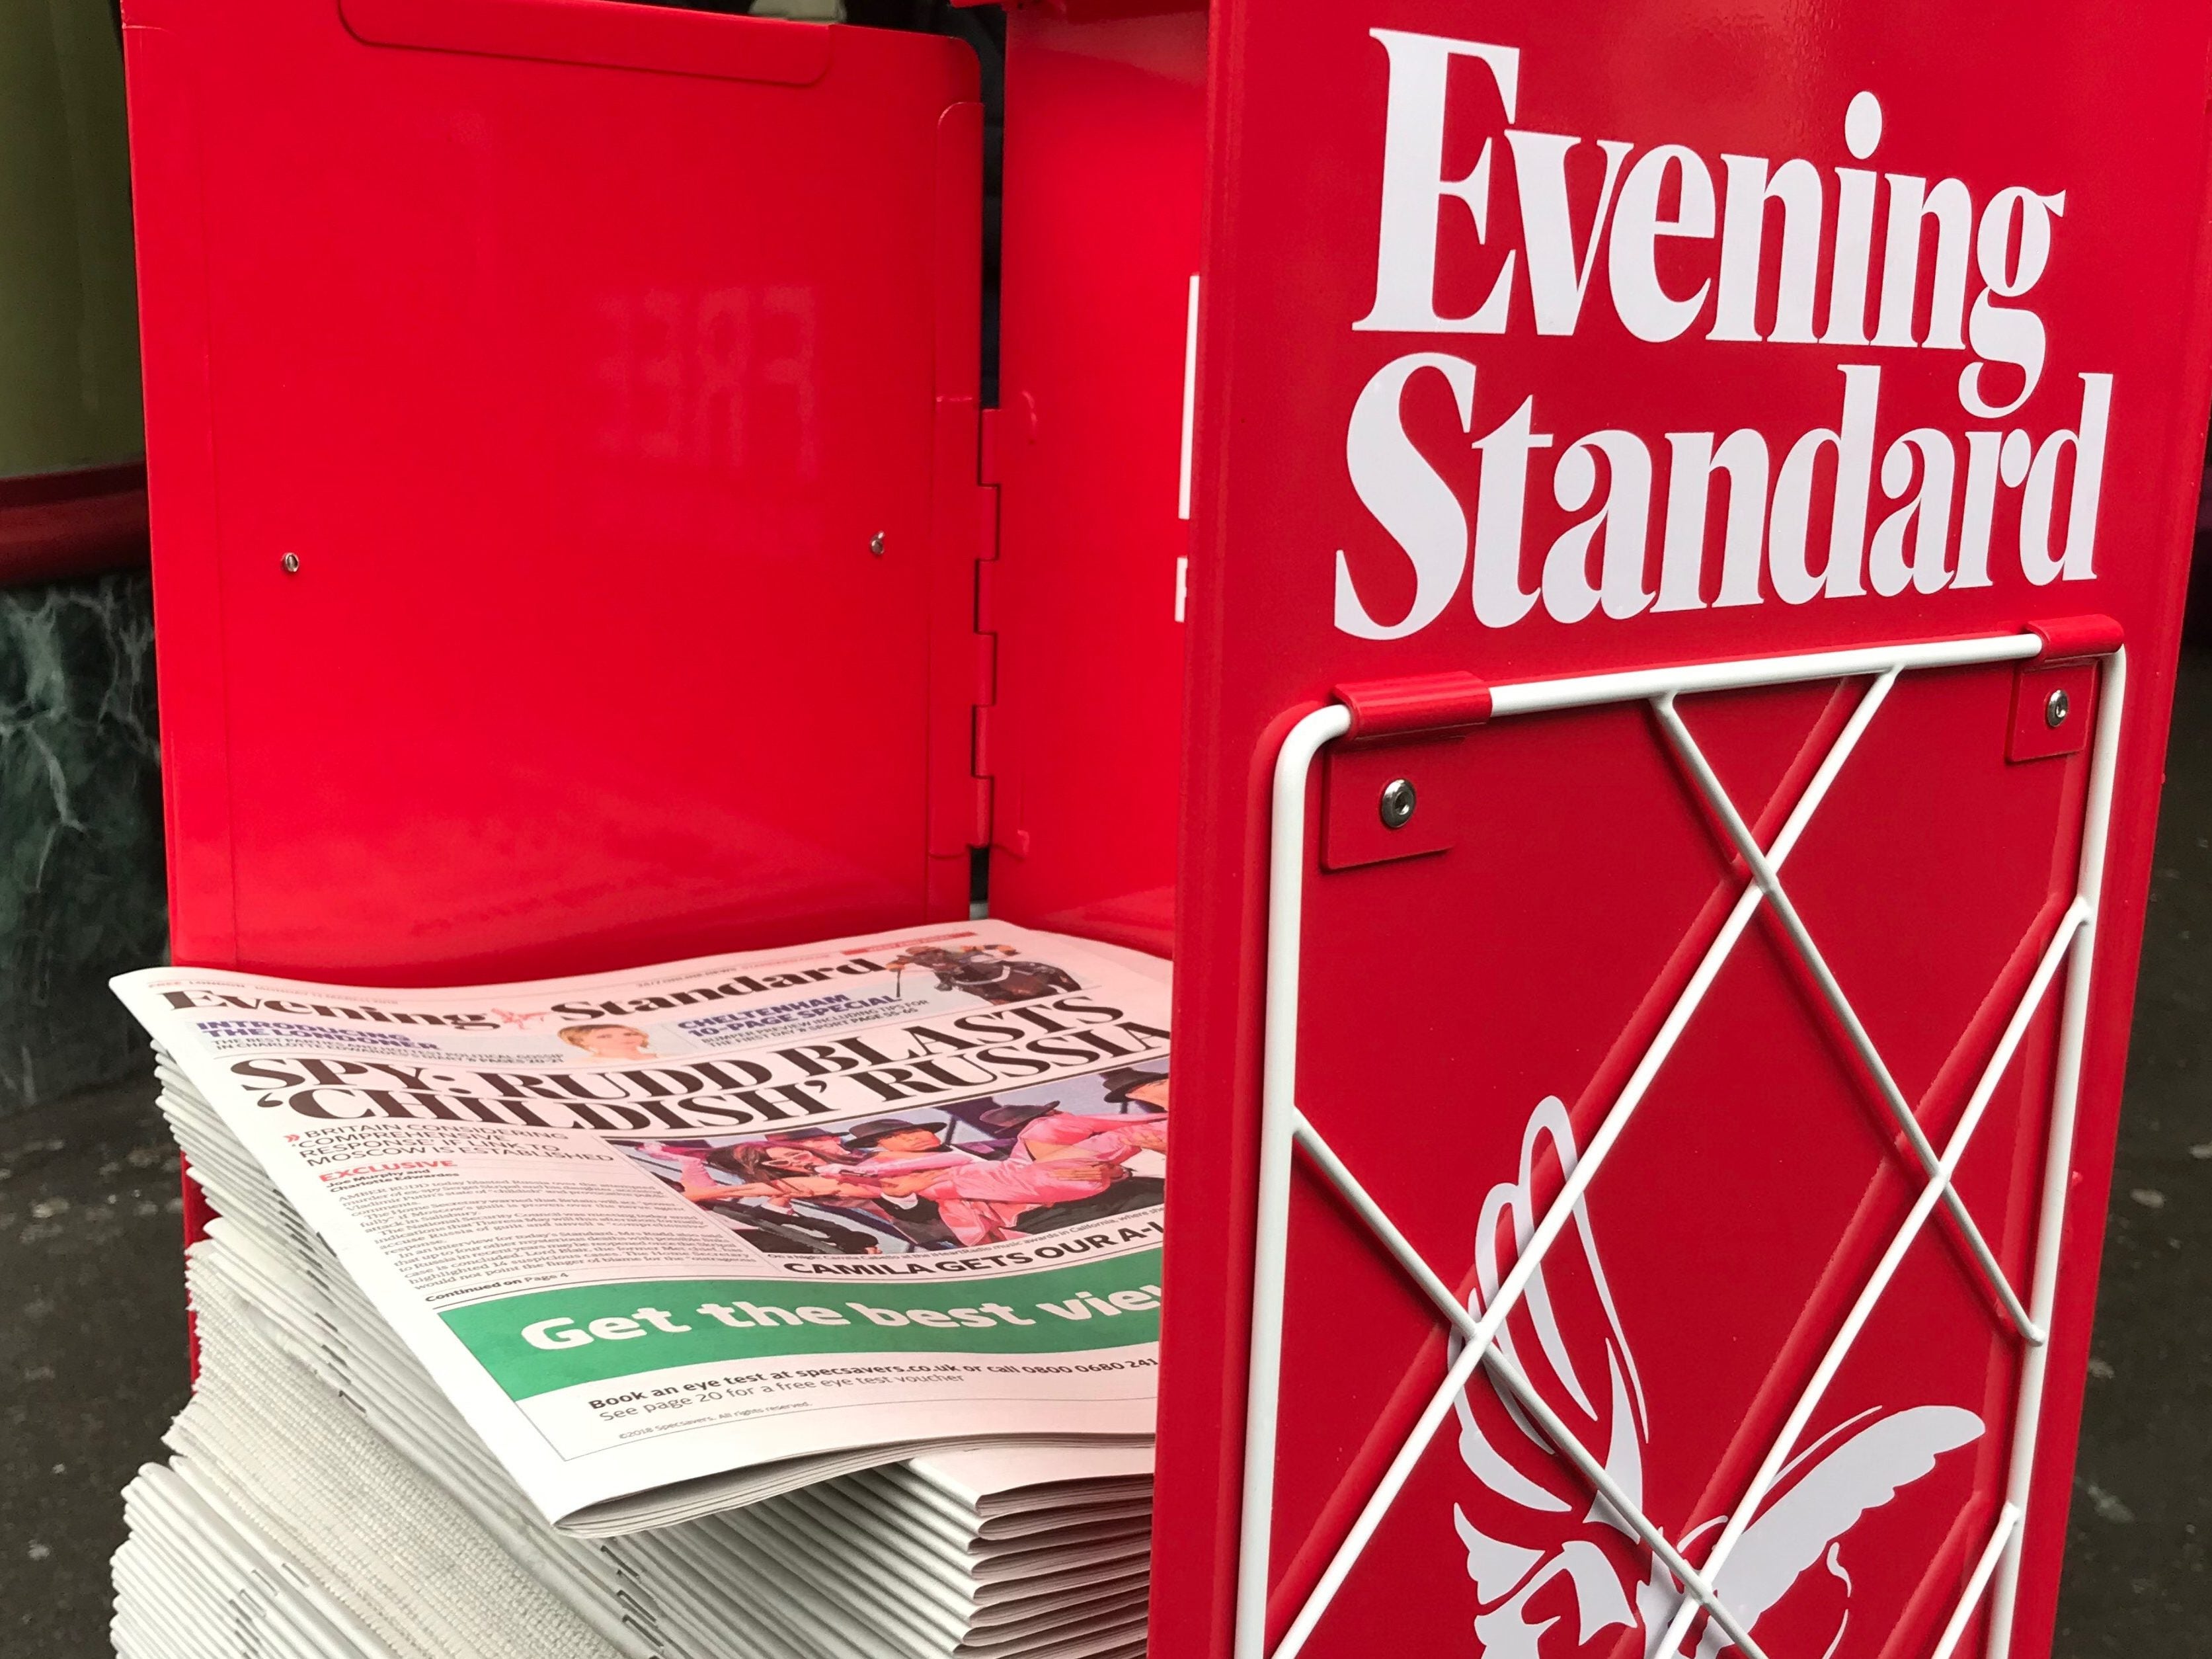 Evening Standard, Independent and PA partner for new apprenticeship scheme to bring diversity to newsrooms